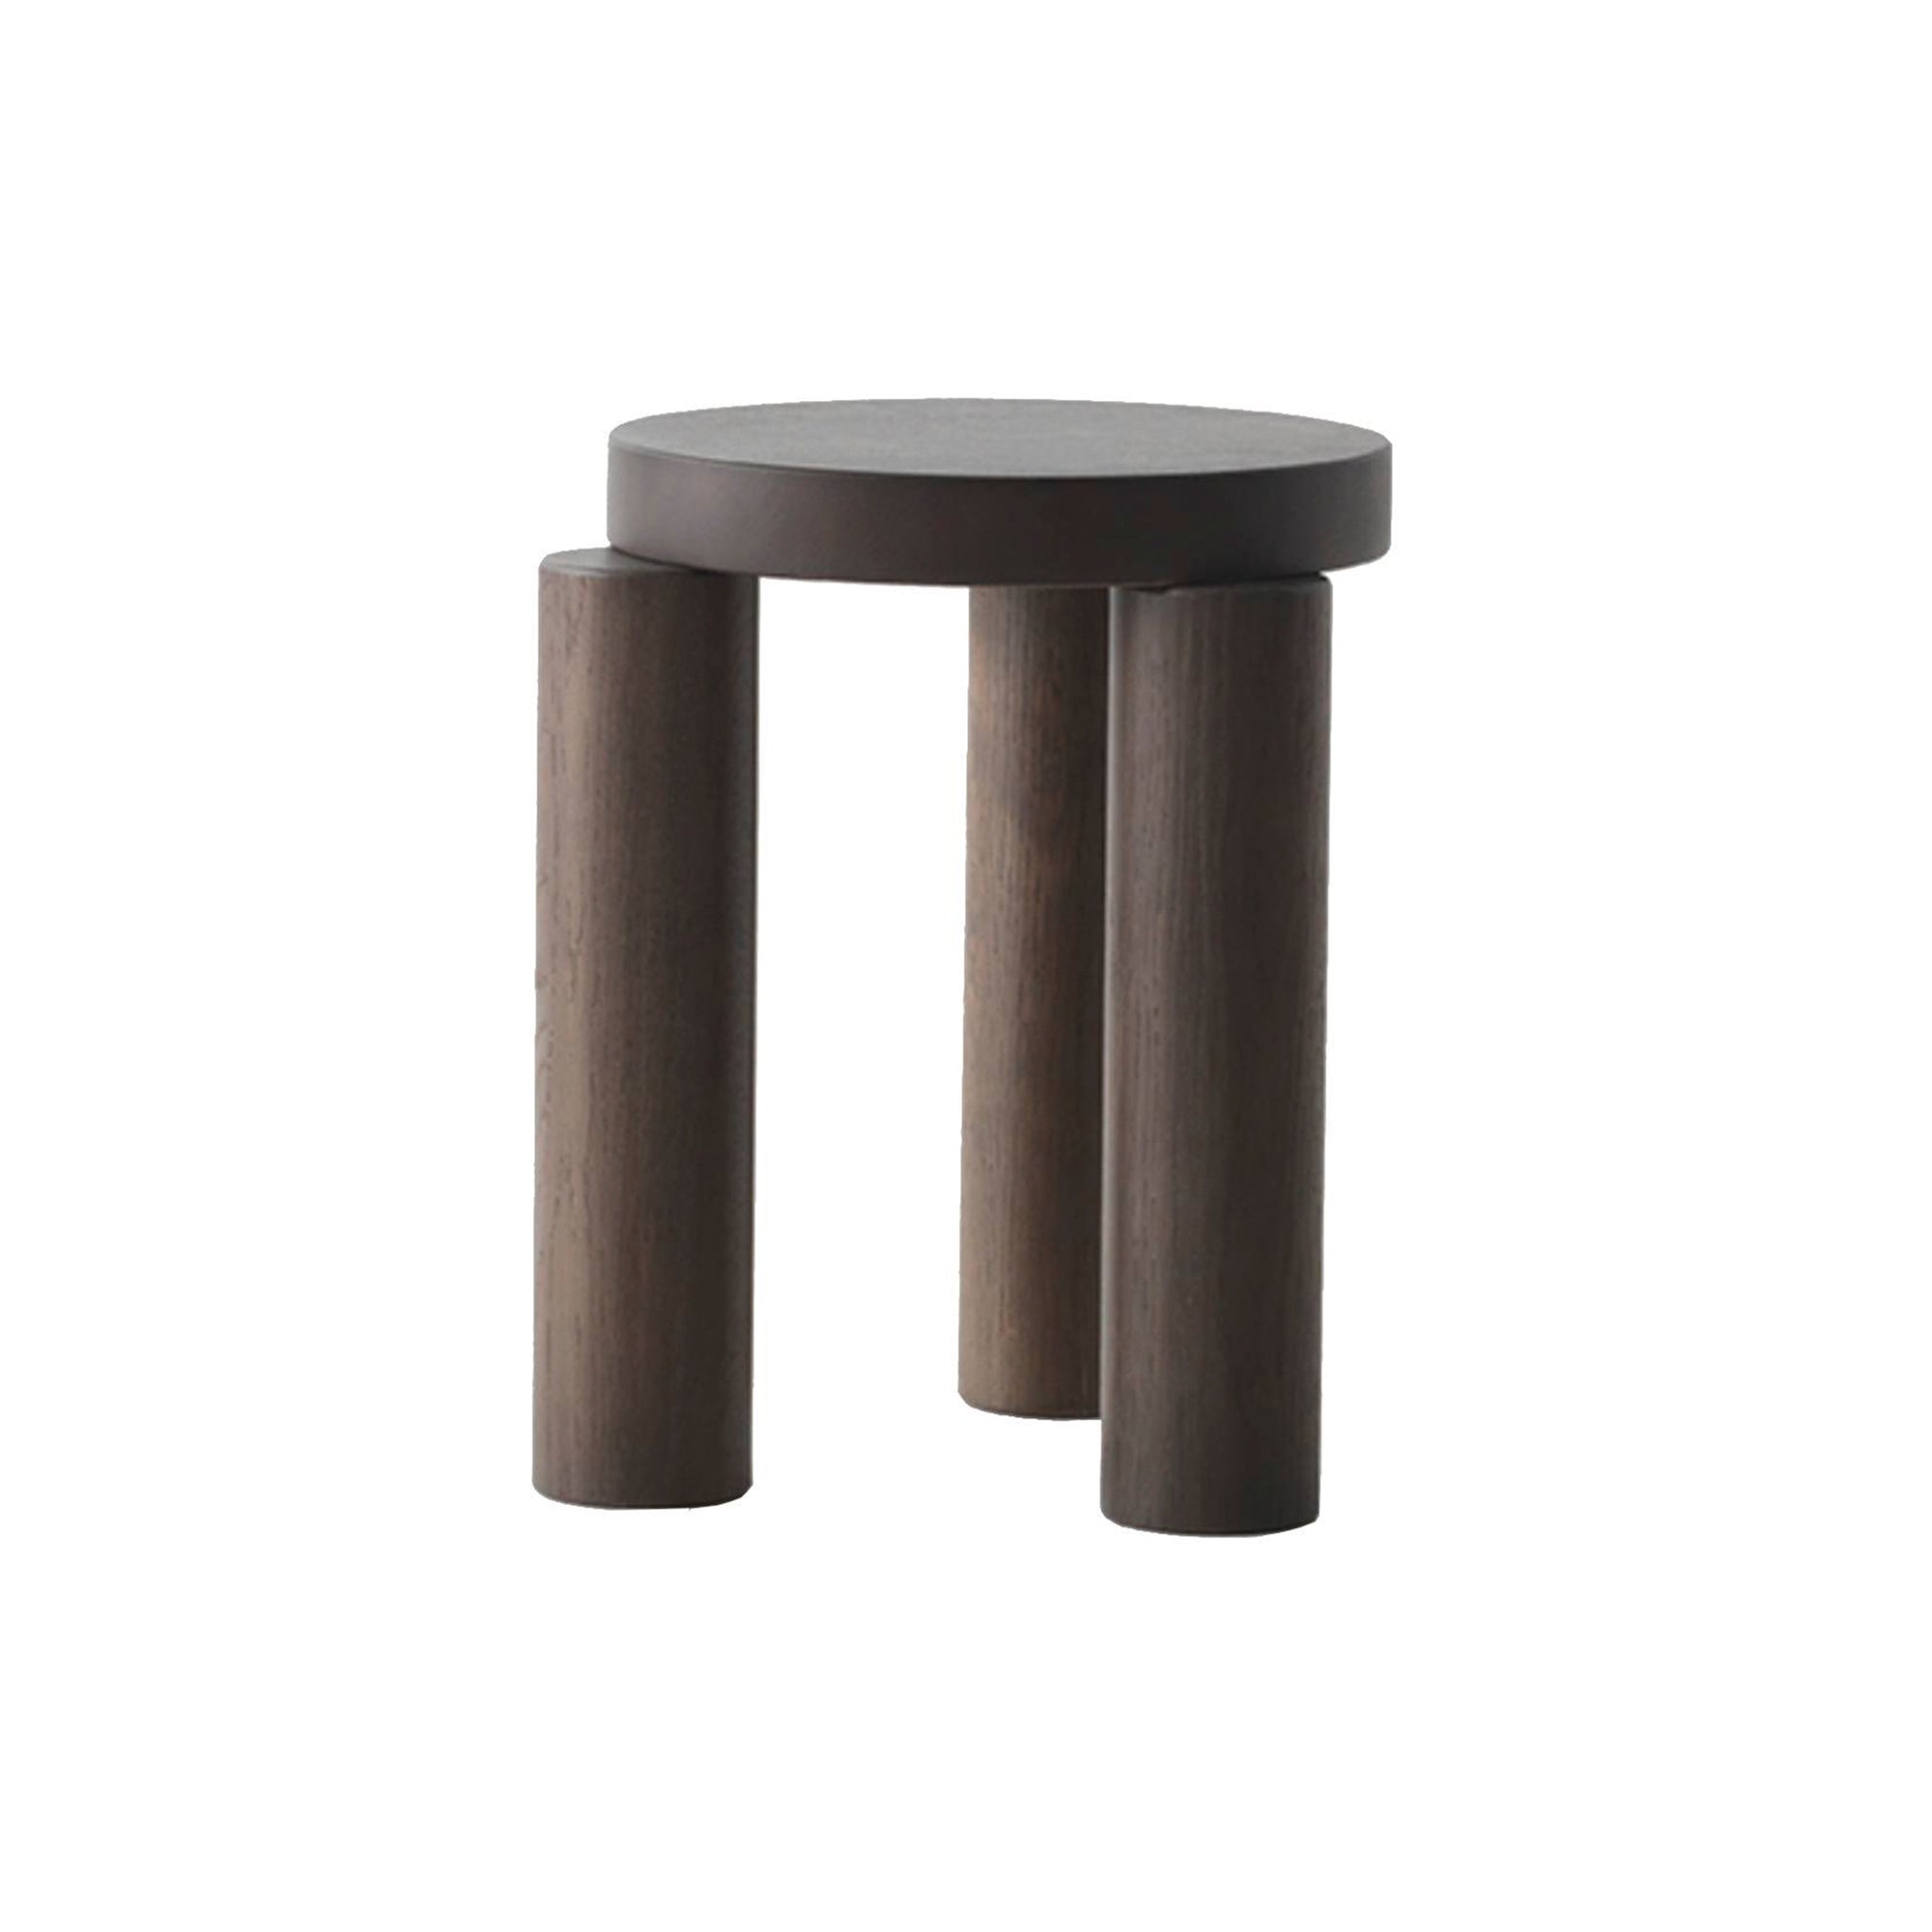 Offset Stool + Side Table: Umber Stained Oak